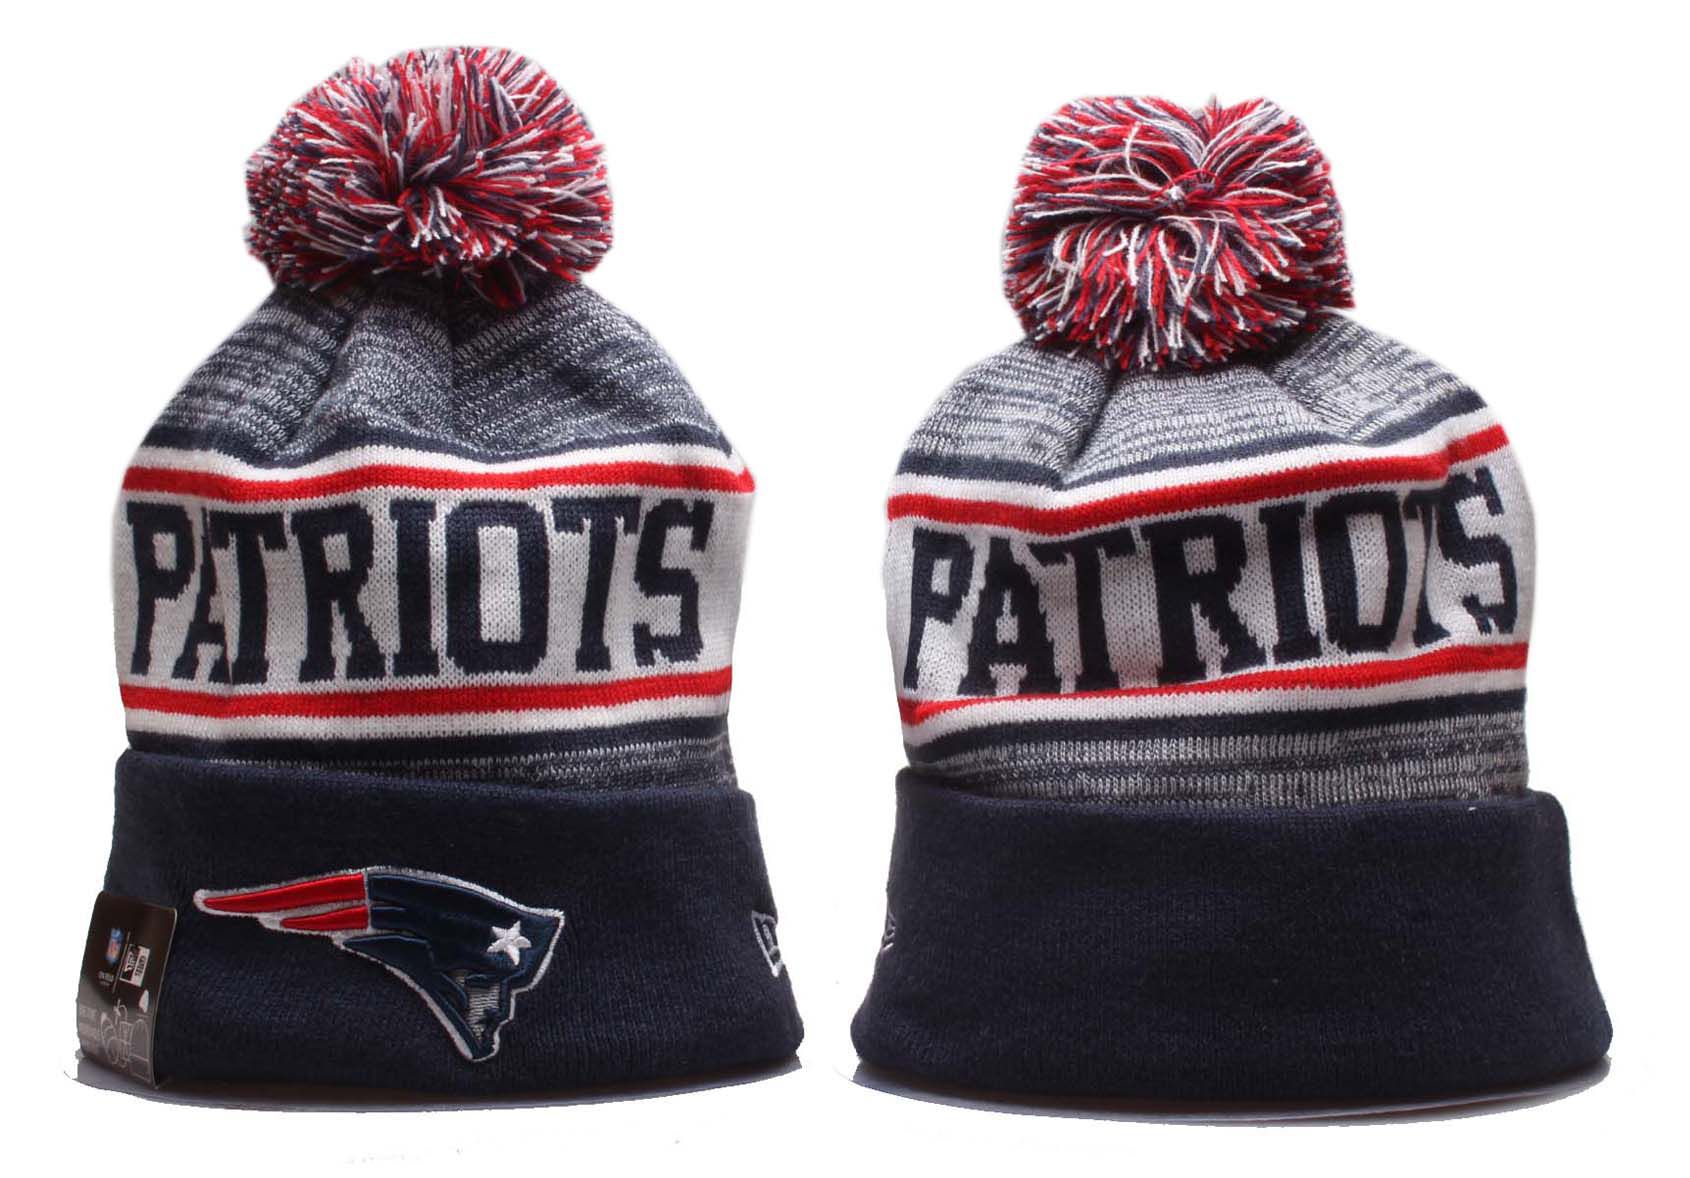 2023 NFL New England Patriots beanies ypmy3->new england patriots->NFL Jersey